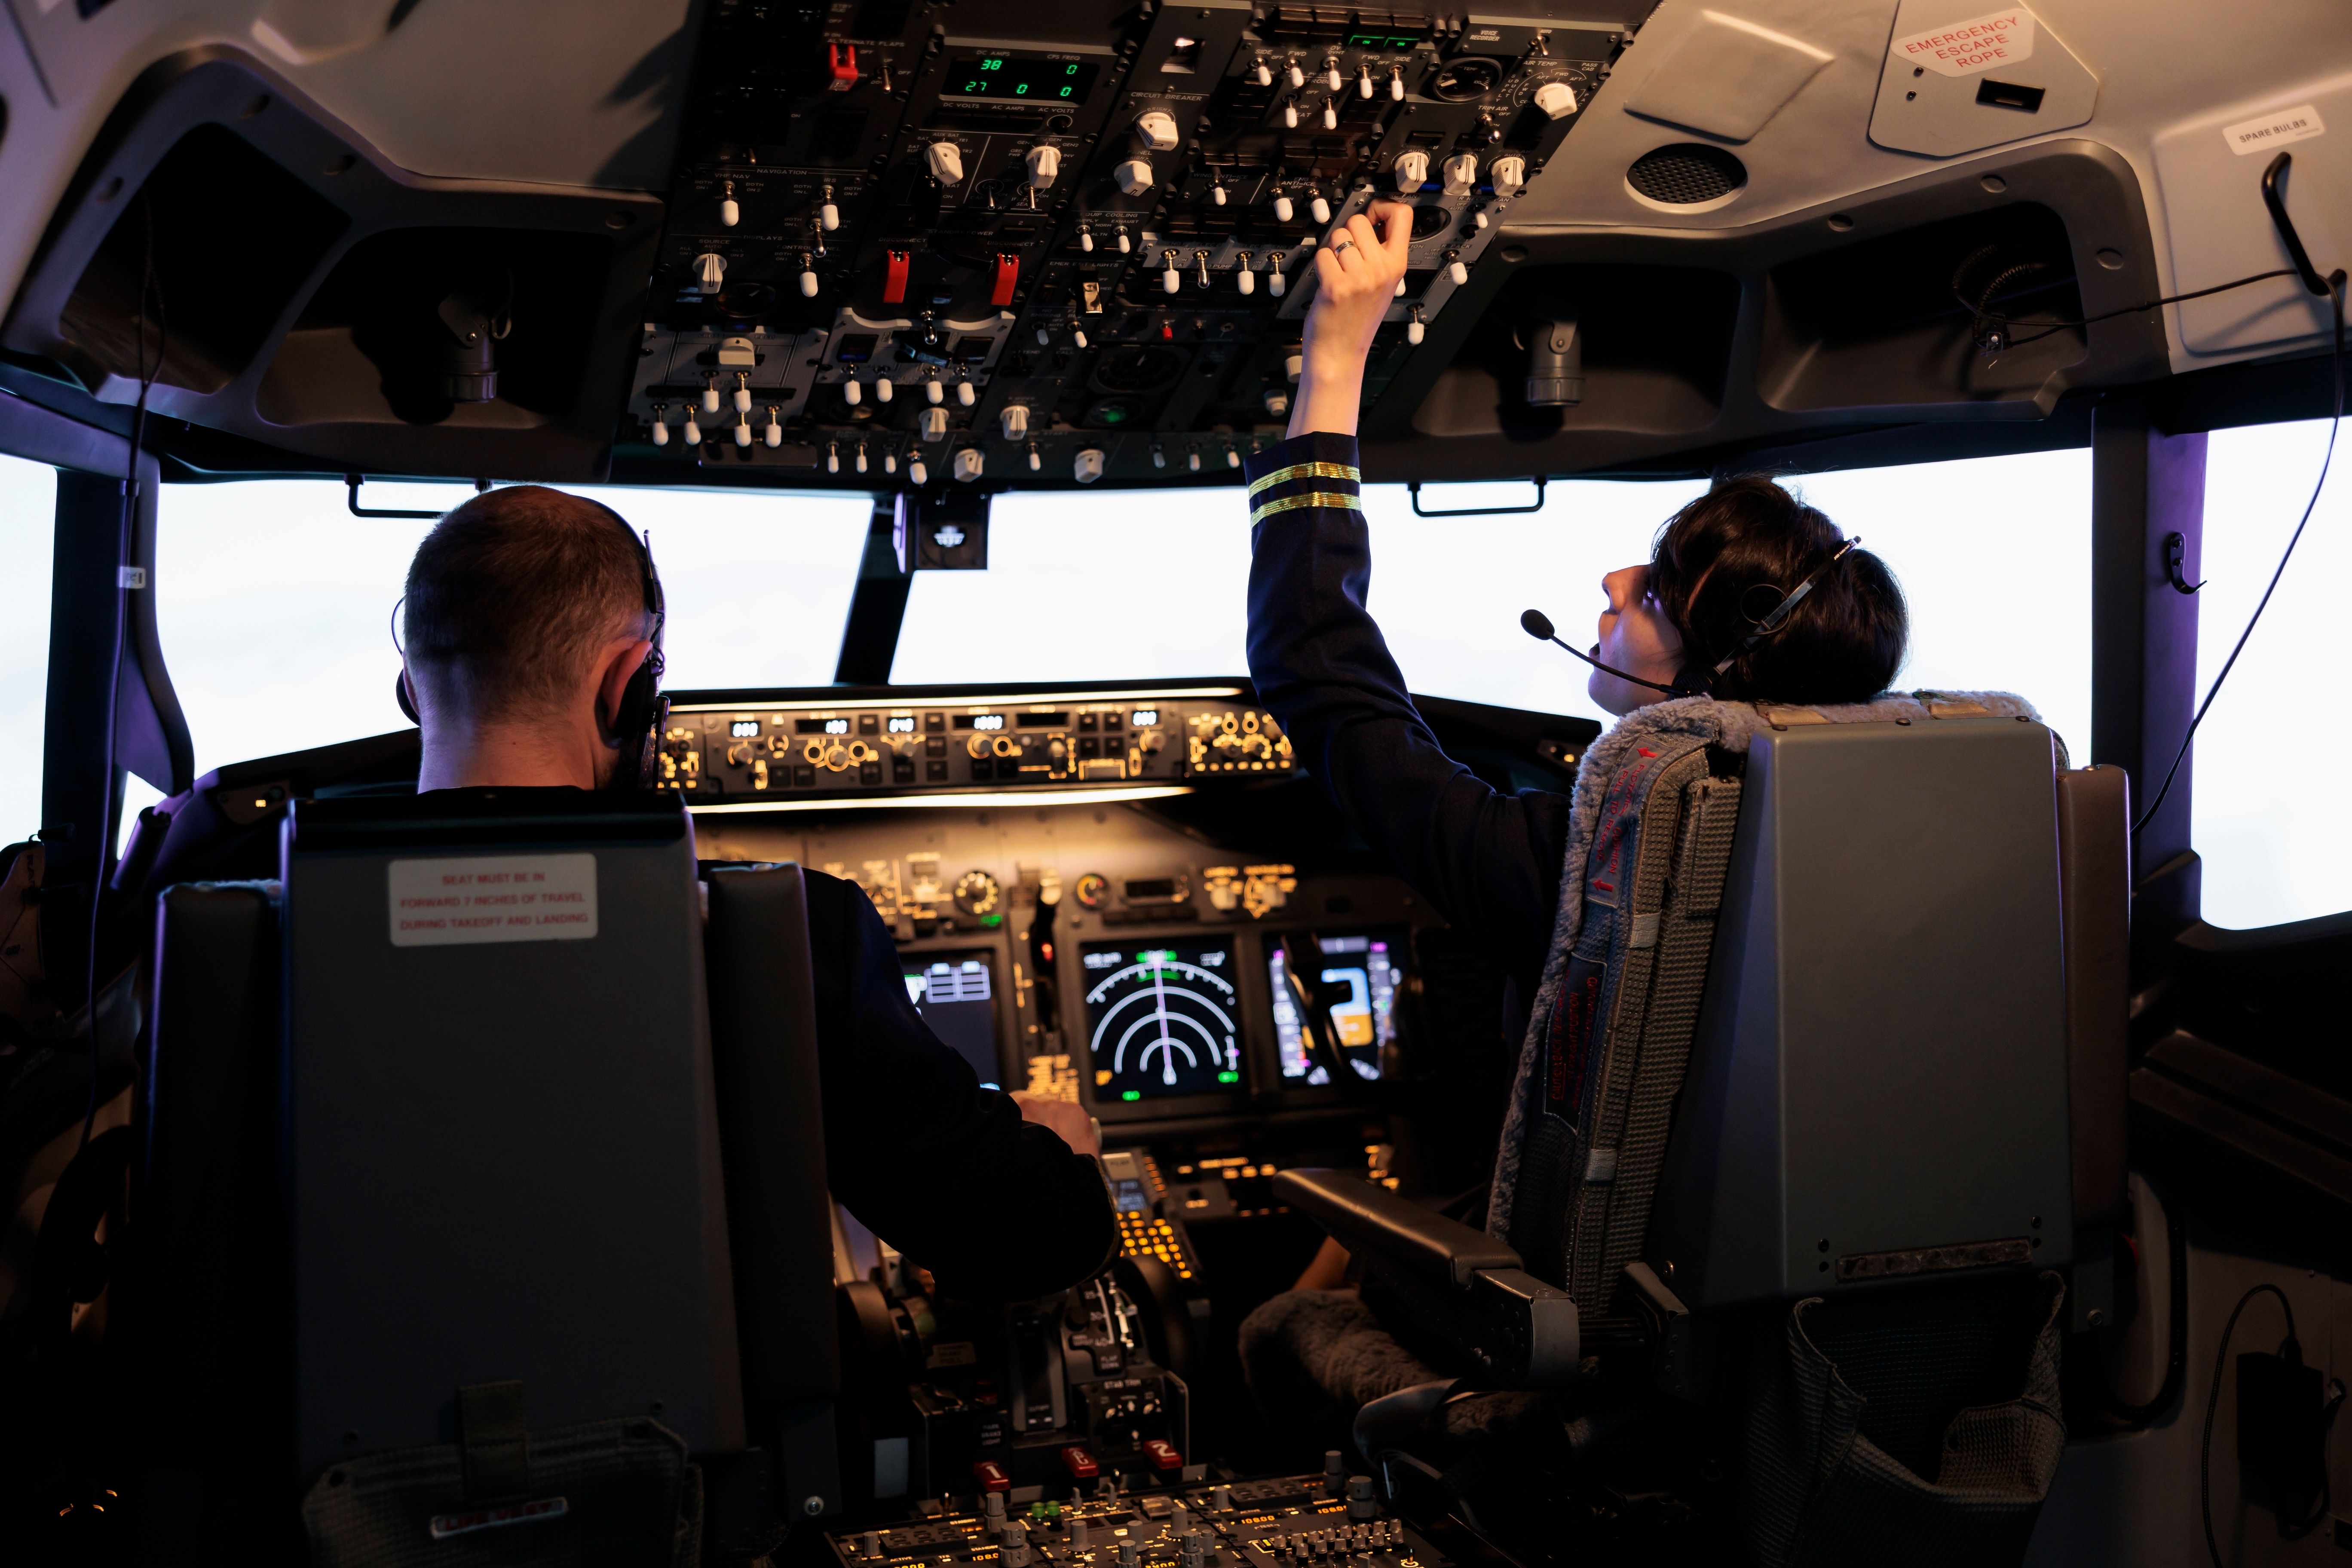 Pilots working in the cockpit.